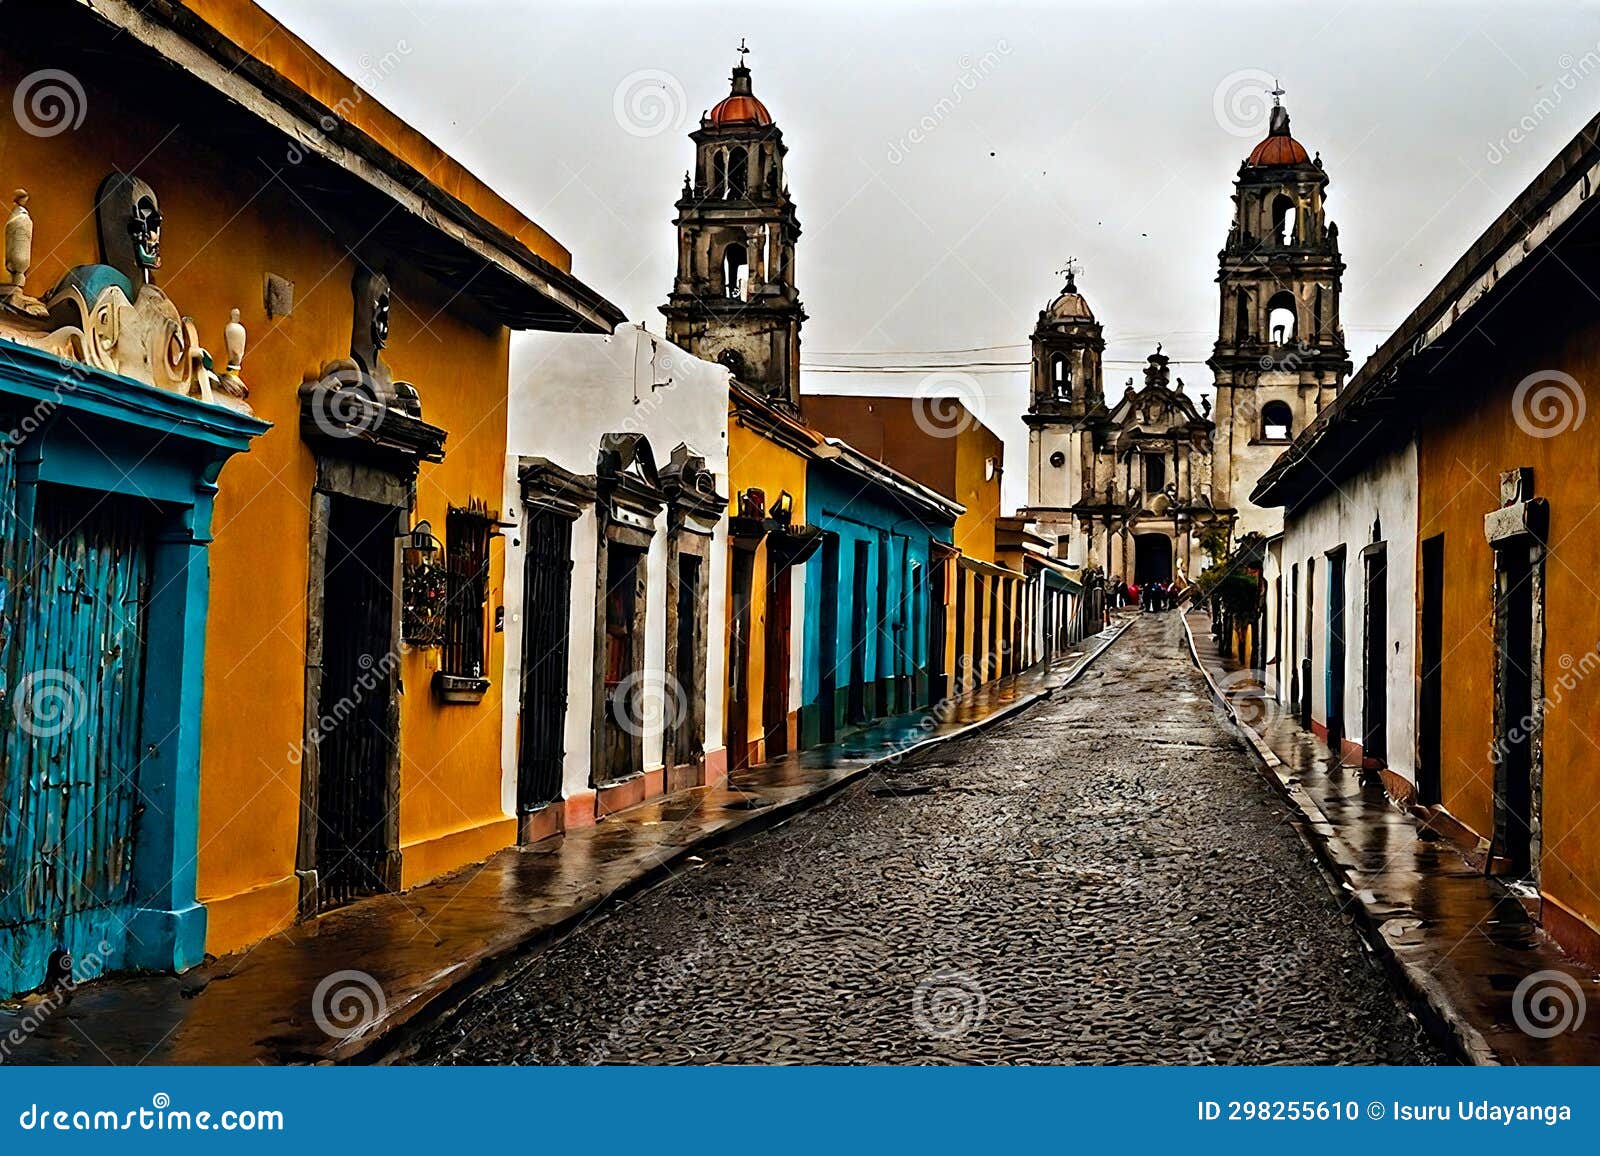 san jose del pacifico streets. cinematic charm of an old mexican city